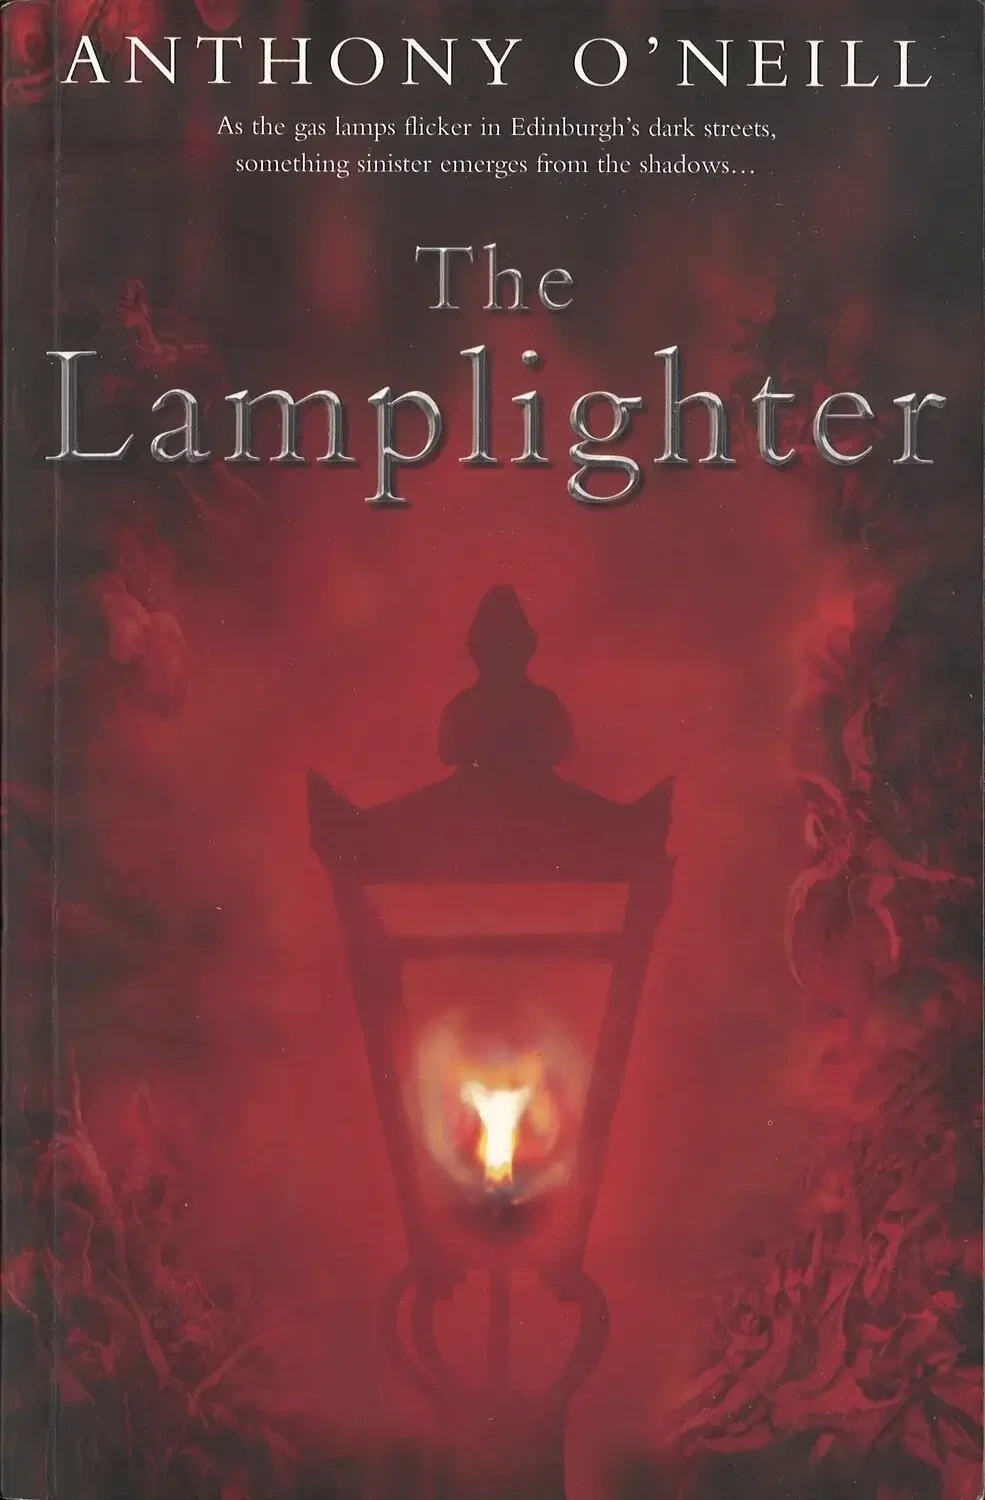 The Lamplighter by Anthony O'Nell